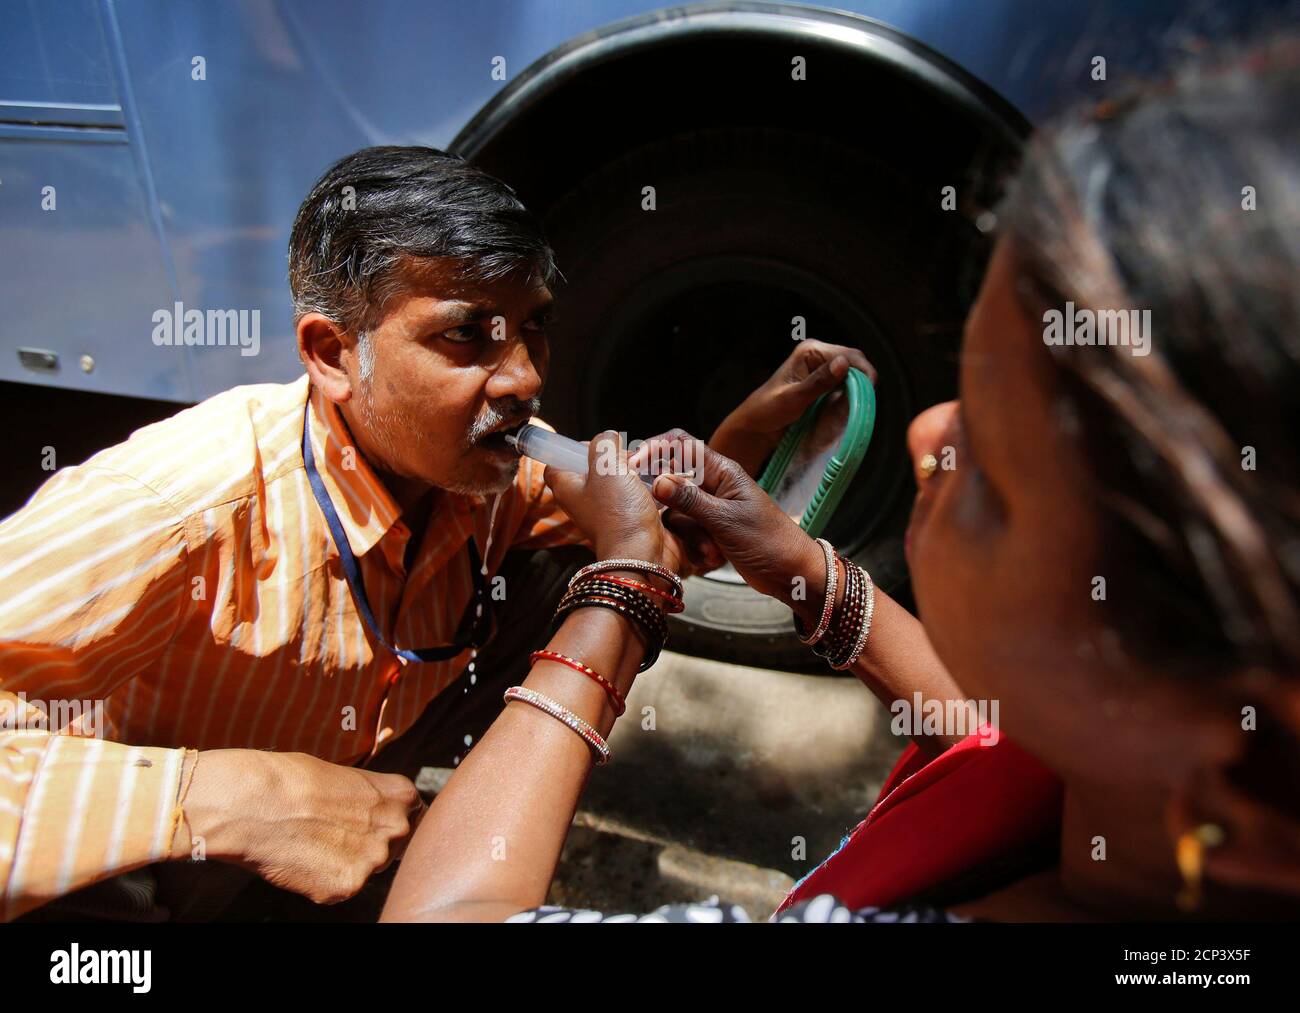 Cancer patient Ramesh Chandra Rathod, 40, is helped by his wife as he rinses his mouth with a syringe after being treated at the Tata Memorial Hospital in Mumbai April 2, 2013. India's top court dismissed Swiss drugmaker Novartis AG's attempt to win patent protection for its cancer drug Glivec, a blow to Western pharmaceutical firms targeting India to drive sales and a victory for local makers of cheap generics. REUTERS/Vivek Prakash (INDIA - Tags: BUSINESS DRUGS SOCIETY HEALTH) Stock Photo